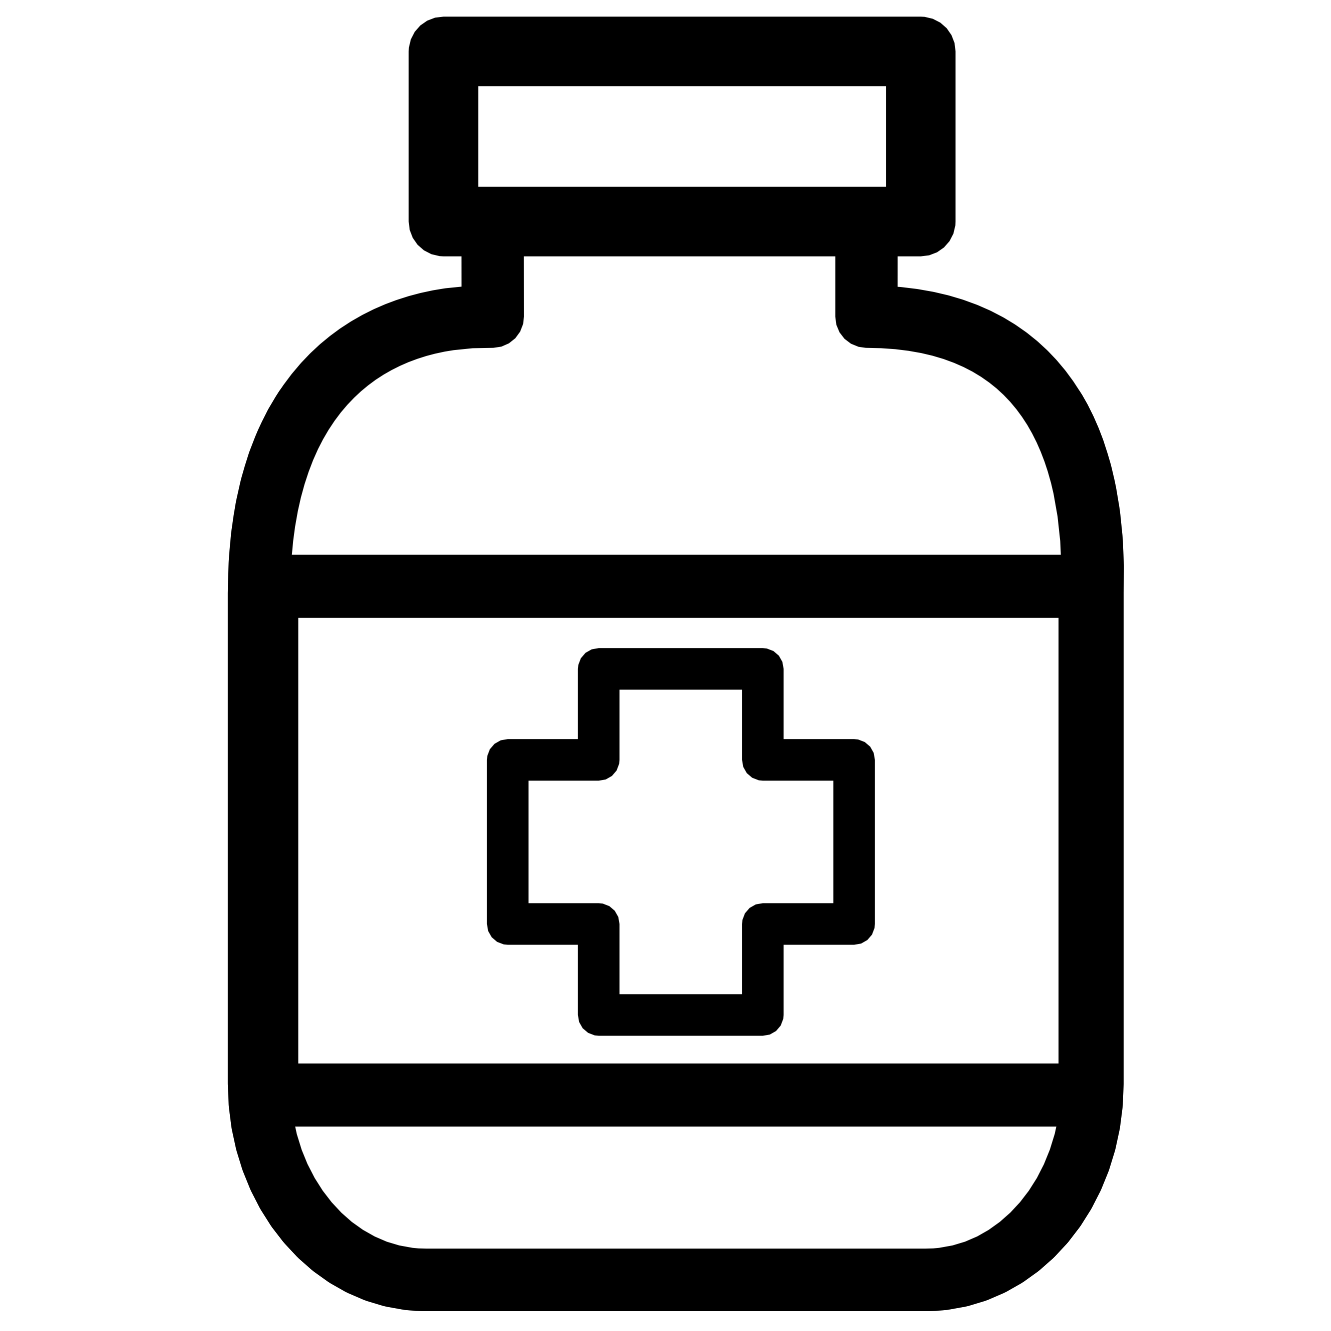 Medication clipart black and white, Medication black and